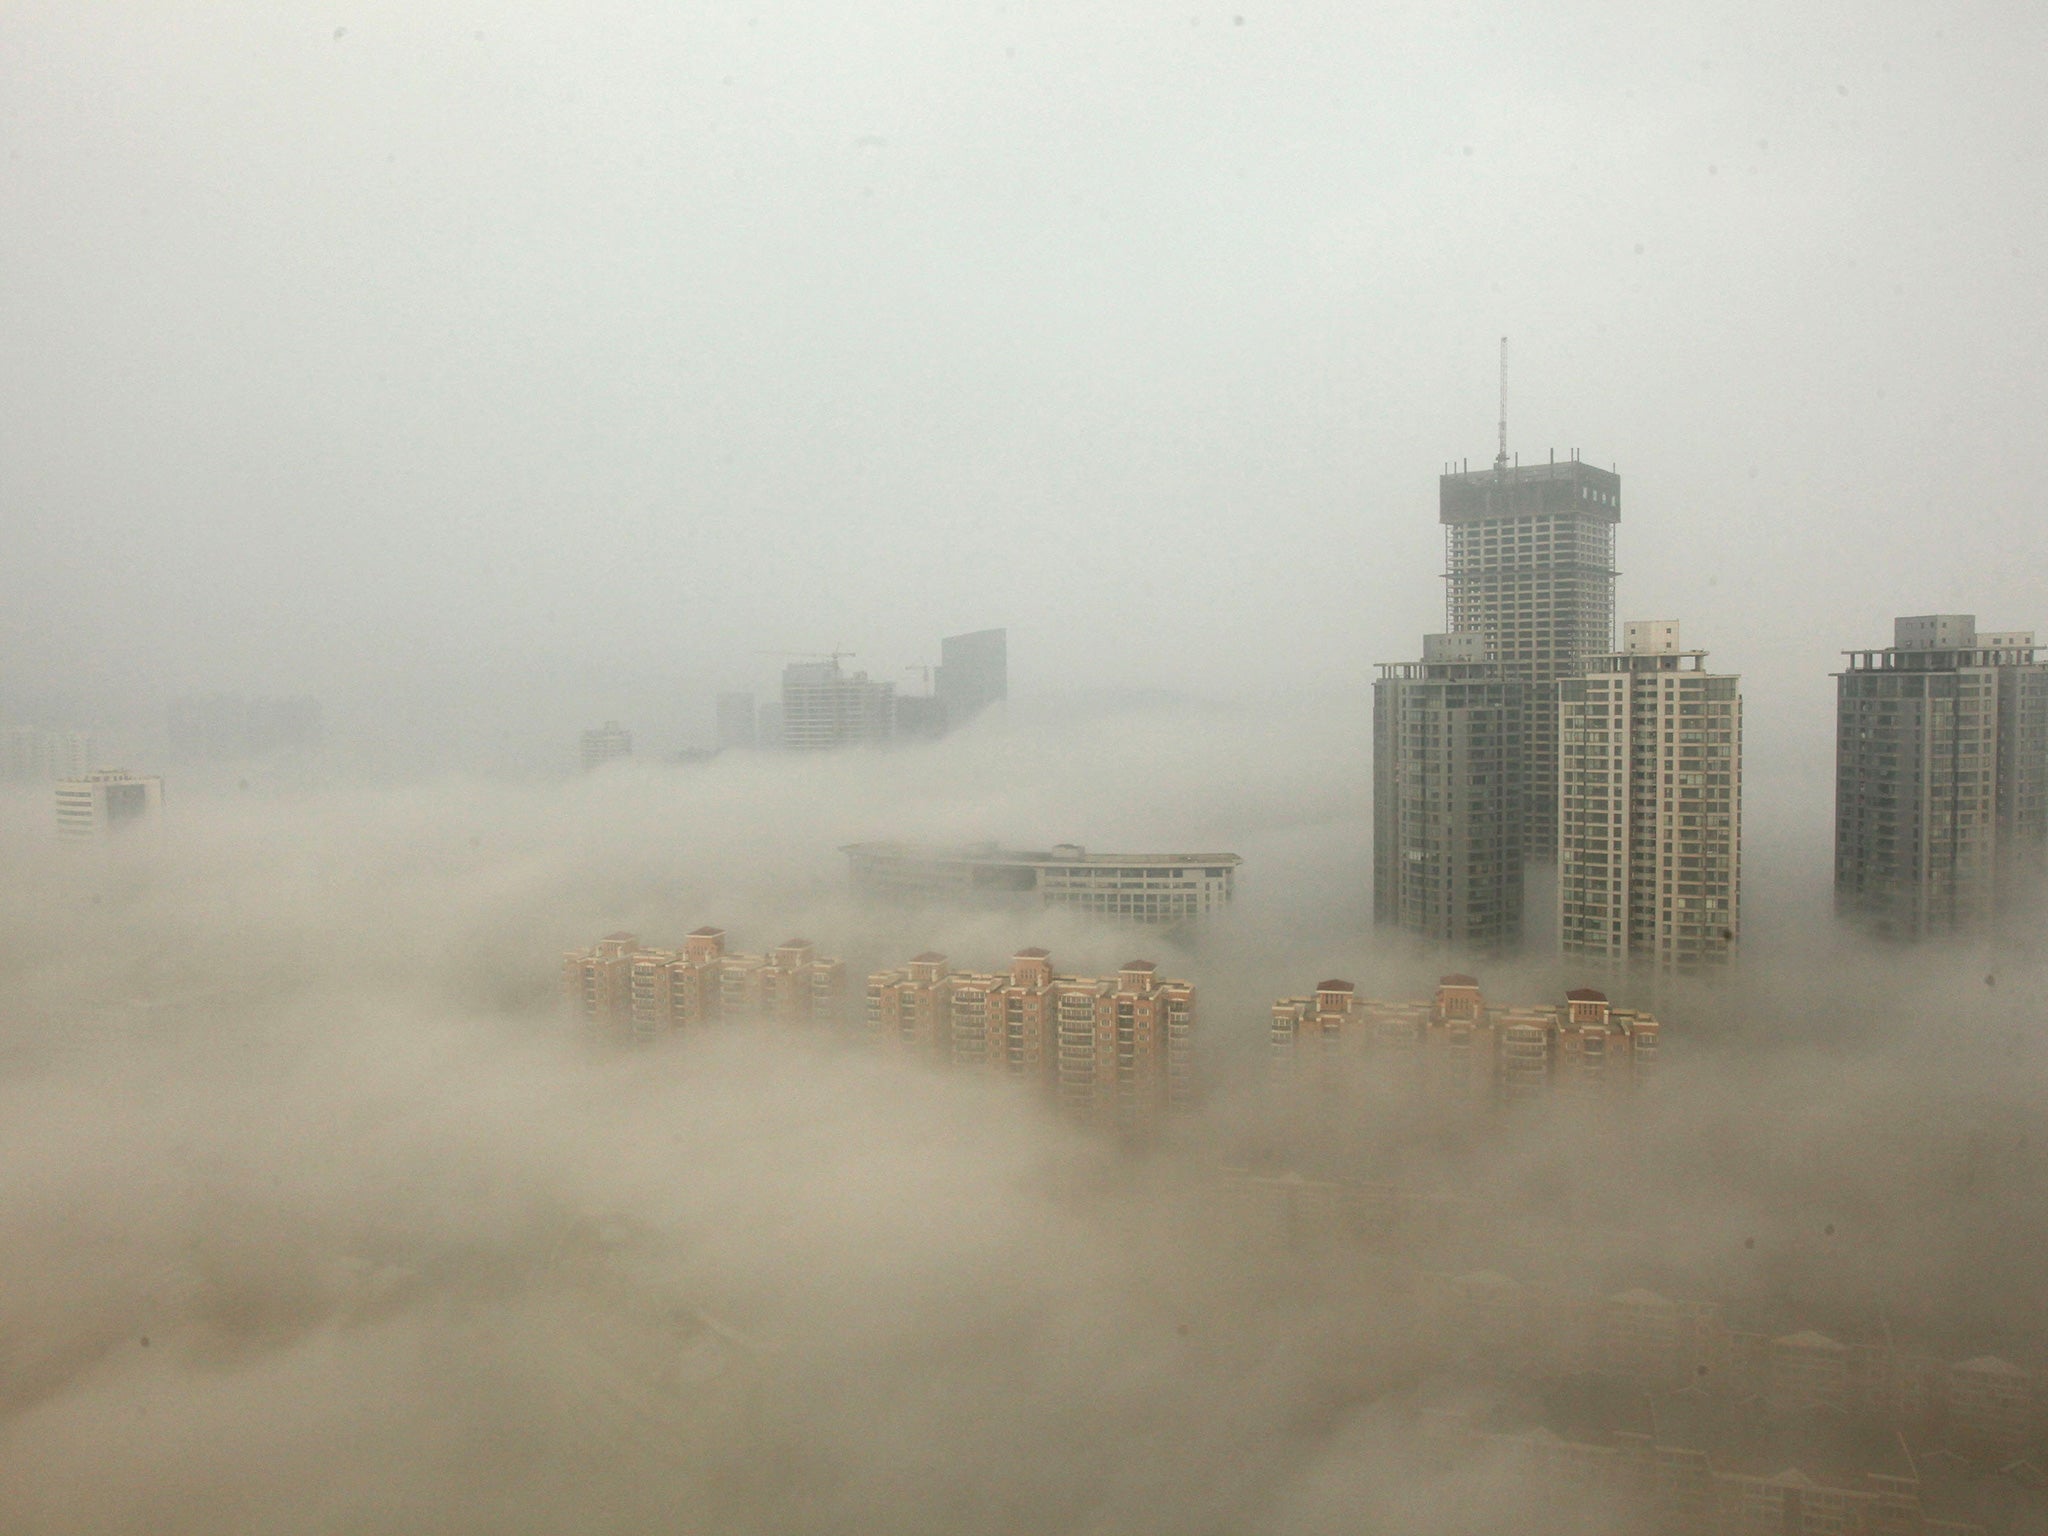 Buildings are shrouded in smog in Lianyungang, China